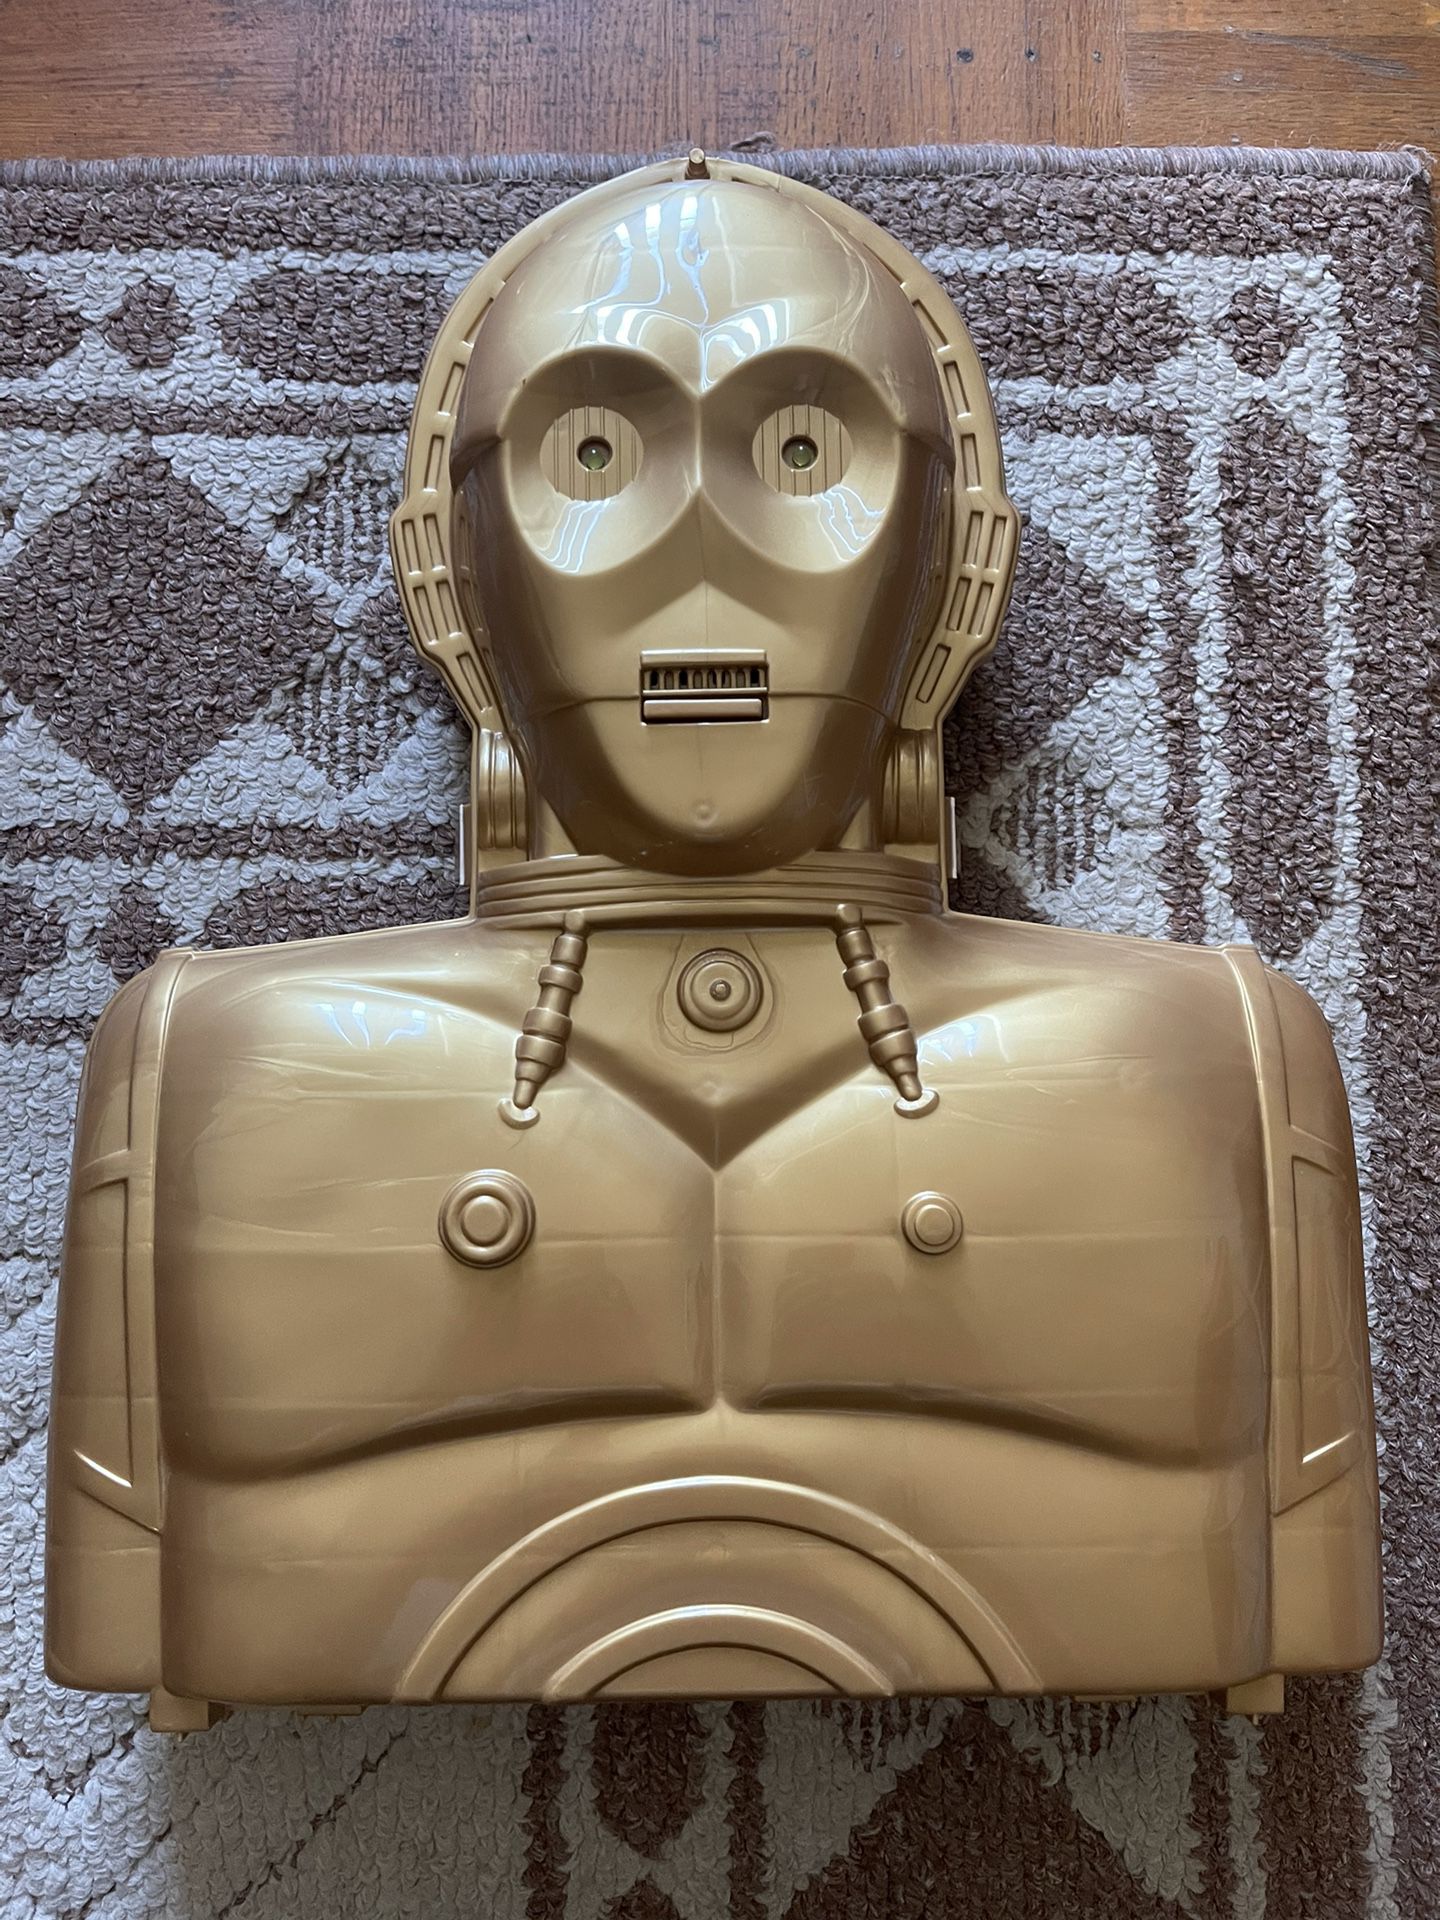 Star Wars C-3PO Talking Action Figure Carrying Case Hasbro 1996 With Toys